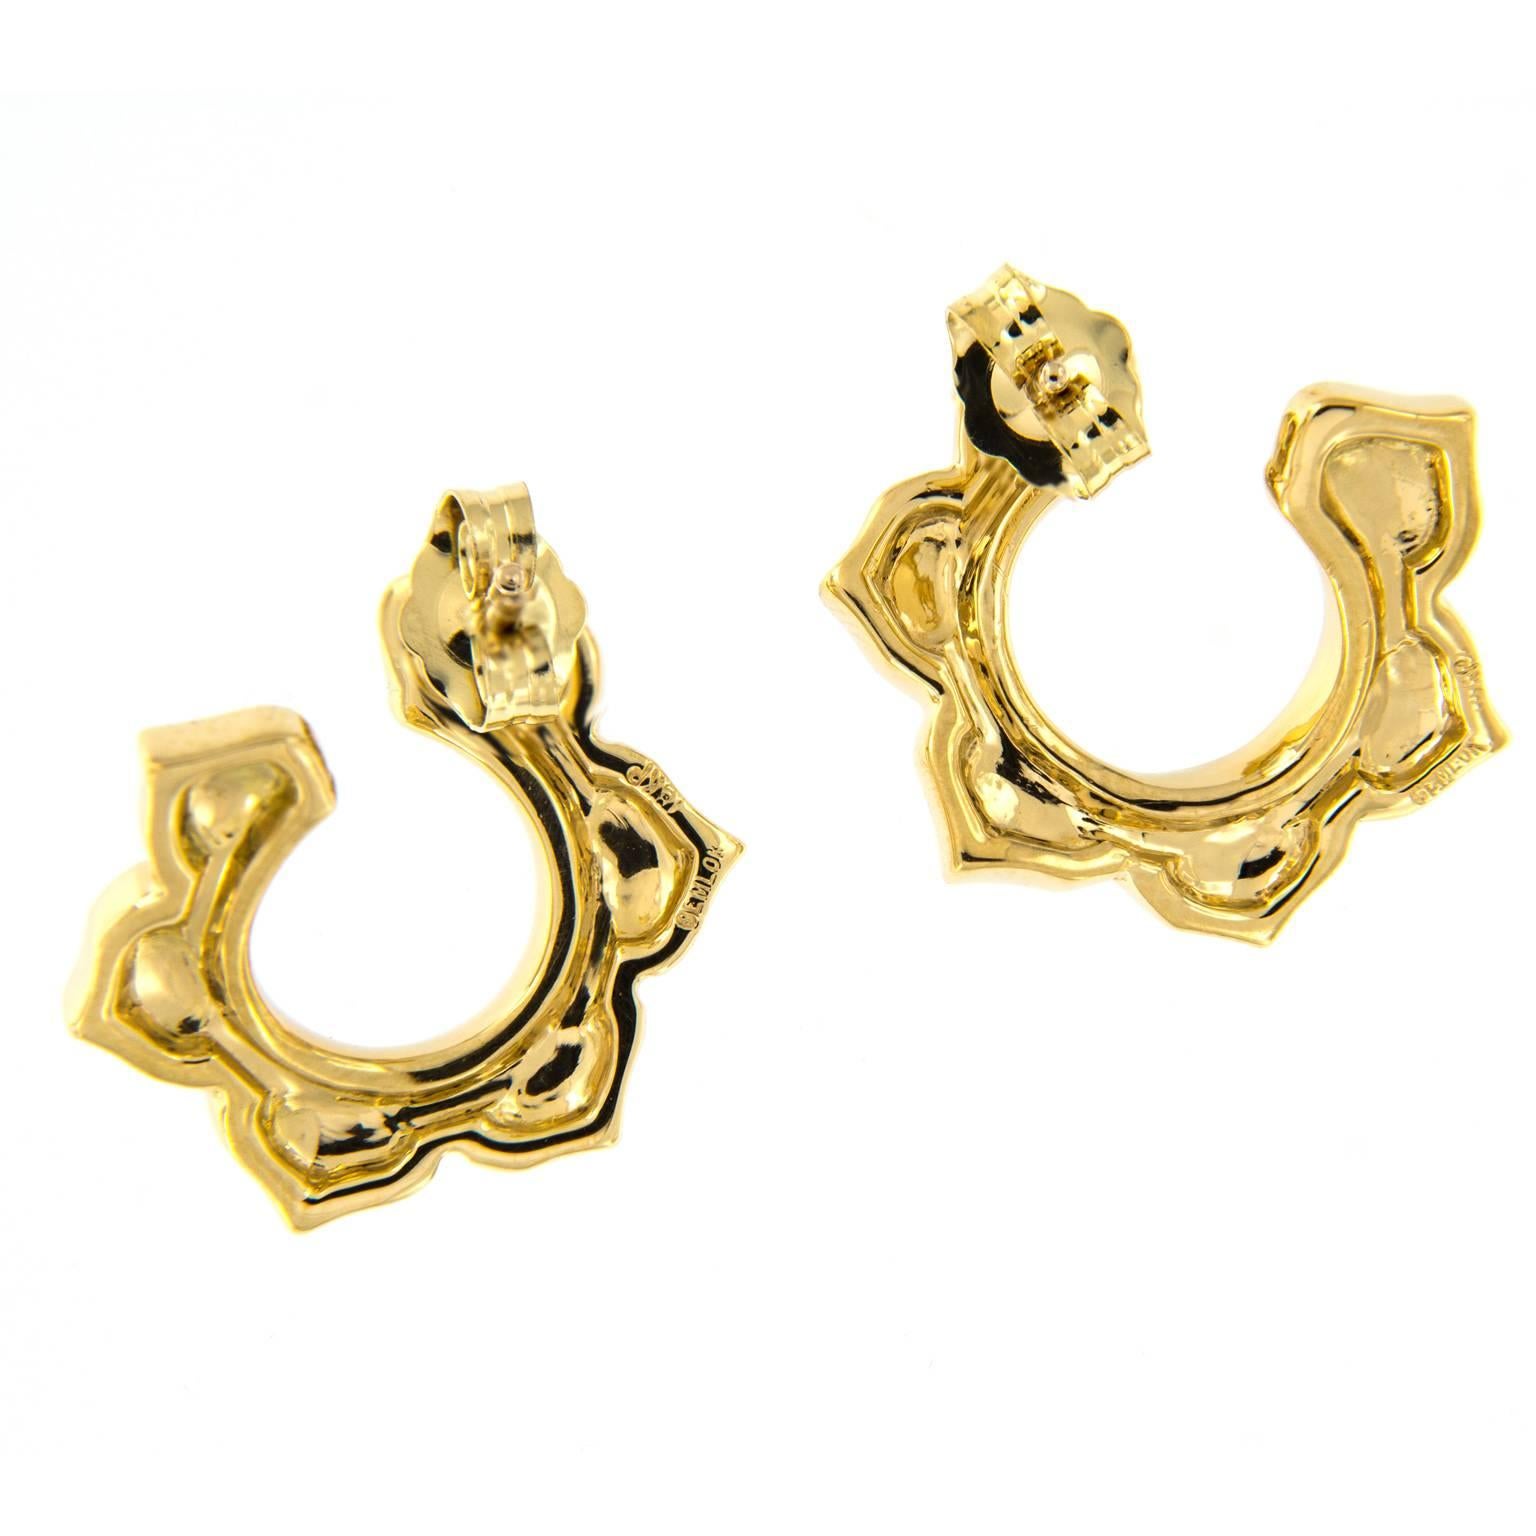 How warm are these contemporary sun design earrings from Gemlok of New York? They are expertly crafted in 18k yellow gold with a slight twist to them for interest & depth.
Approximate diameter 16 mm.

Marked Gemlok